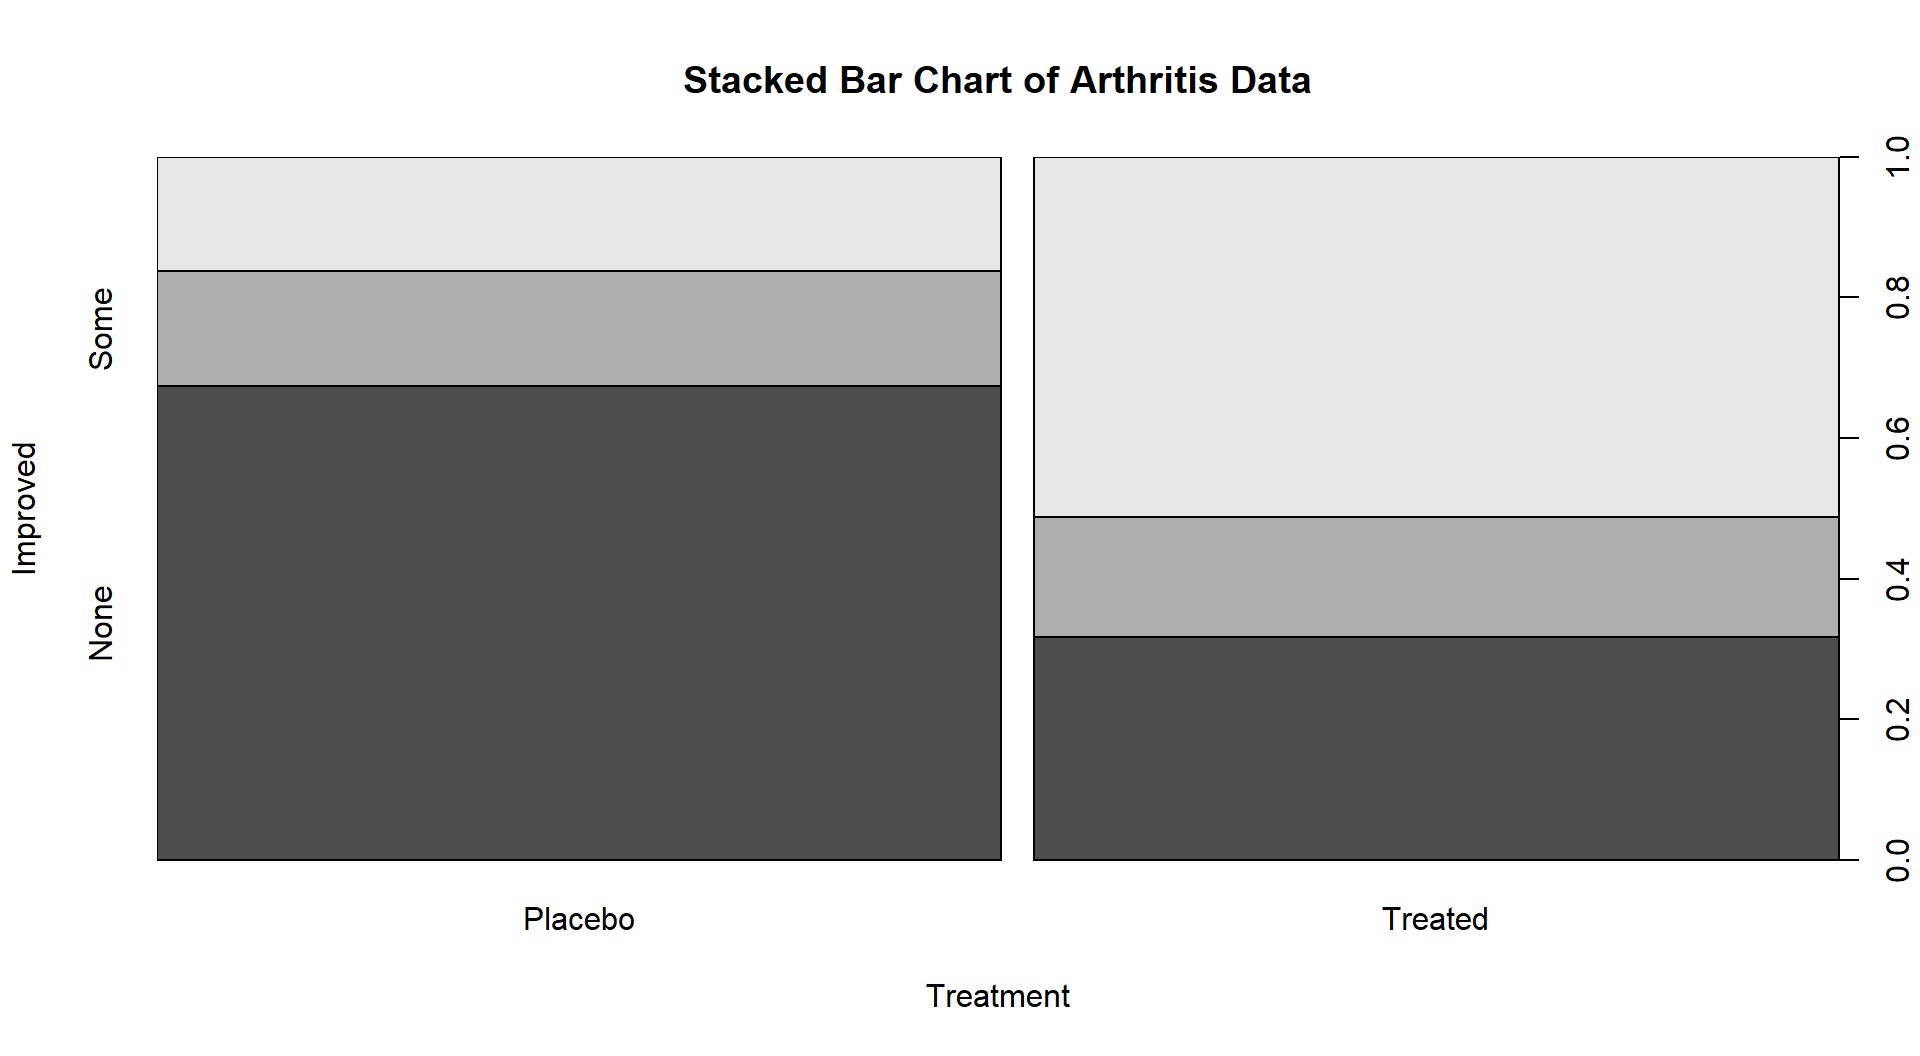 Stacked bar chart of the Arthritis data comparing Treated and Placebo.